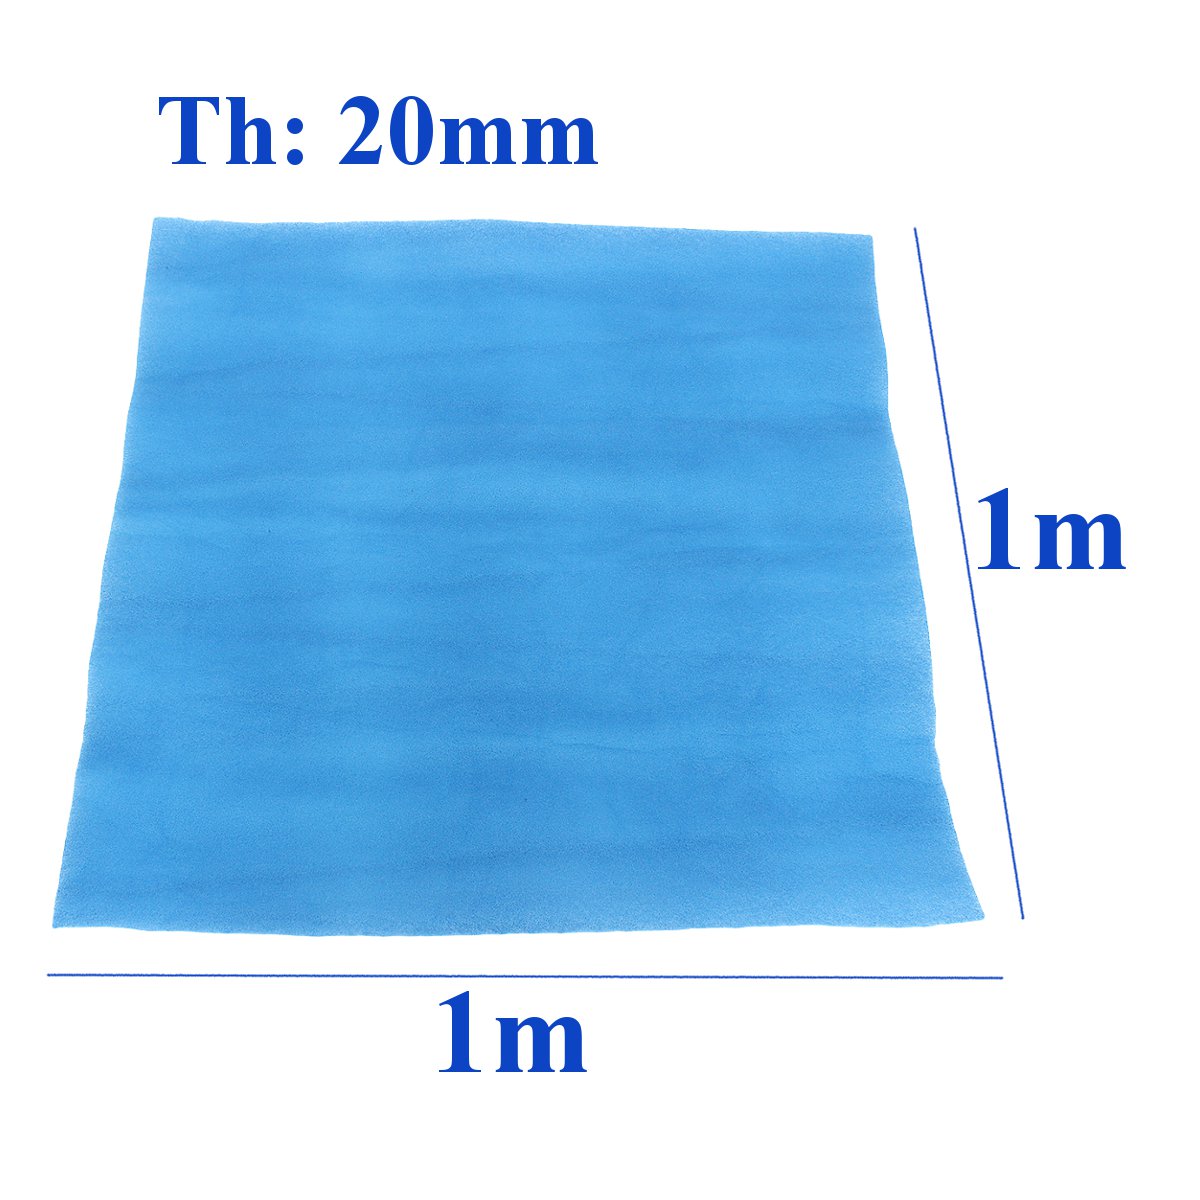 1x1m Booth Air Filter Material Paint Shop Car Spray Atomize Thickness 20mm 